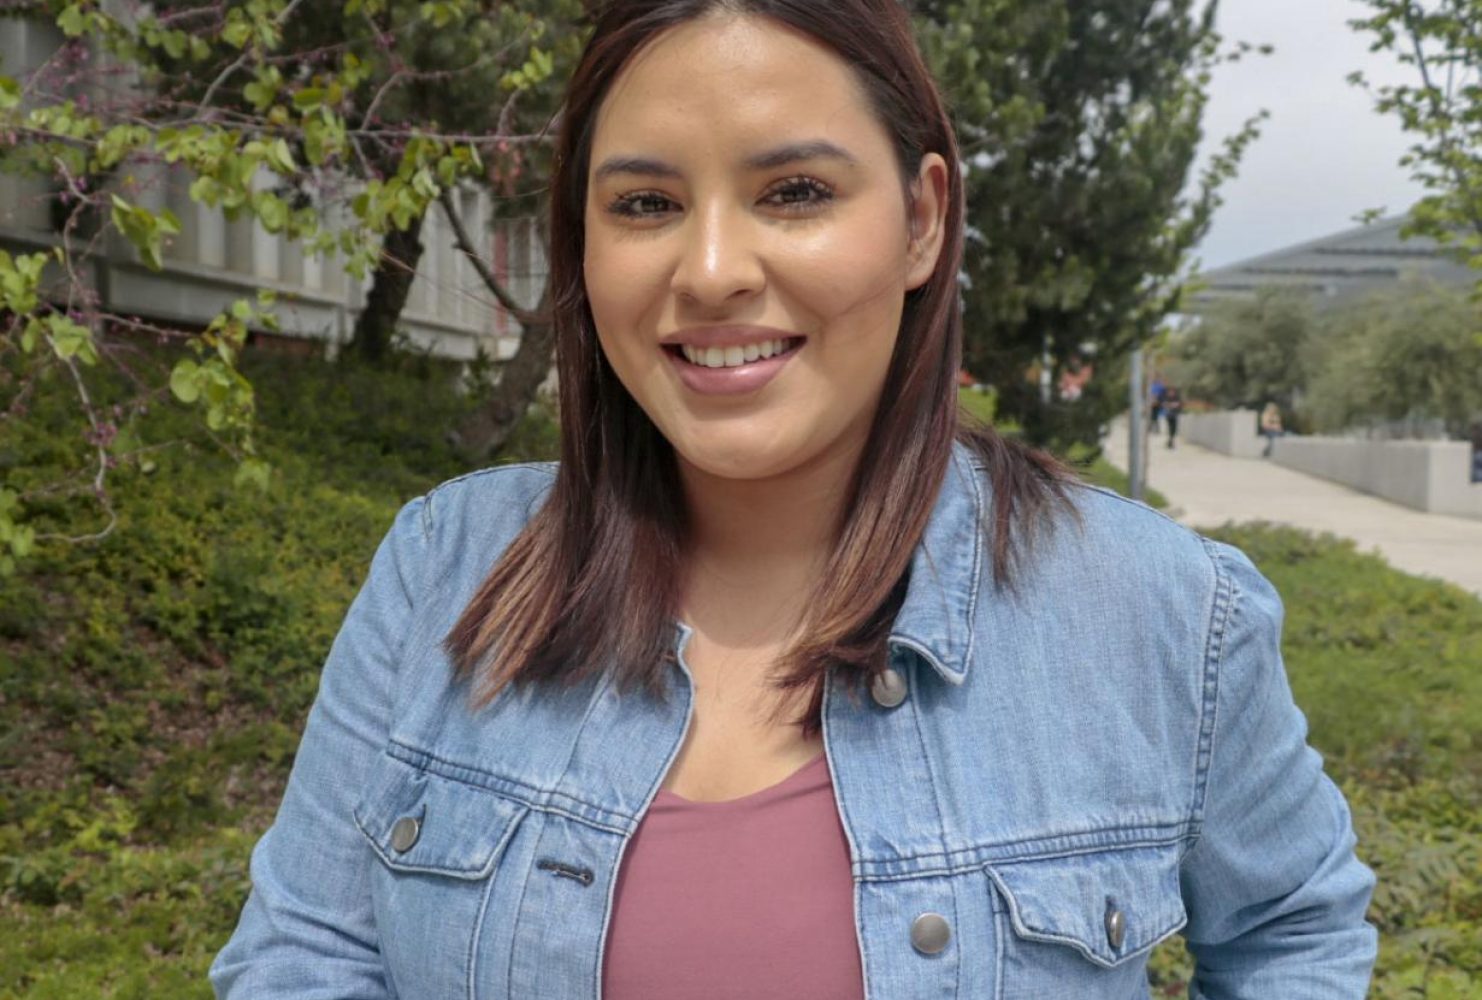 “[The] Associate Student Body has a president, vice president, senators and furthermore they are here to help better our school campus. Yes, I did vote.” – Karla Campos | Child Development Major